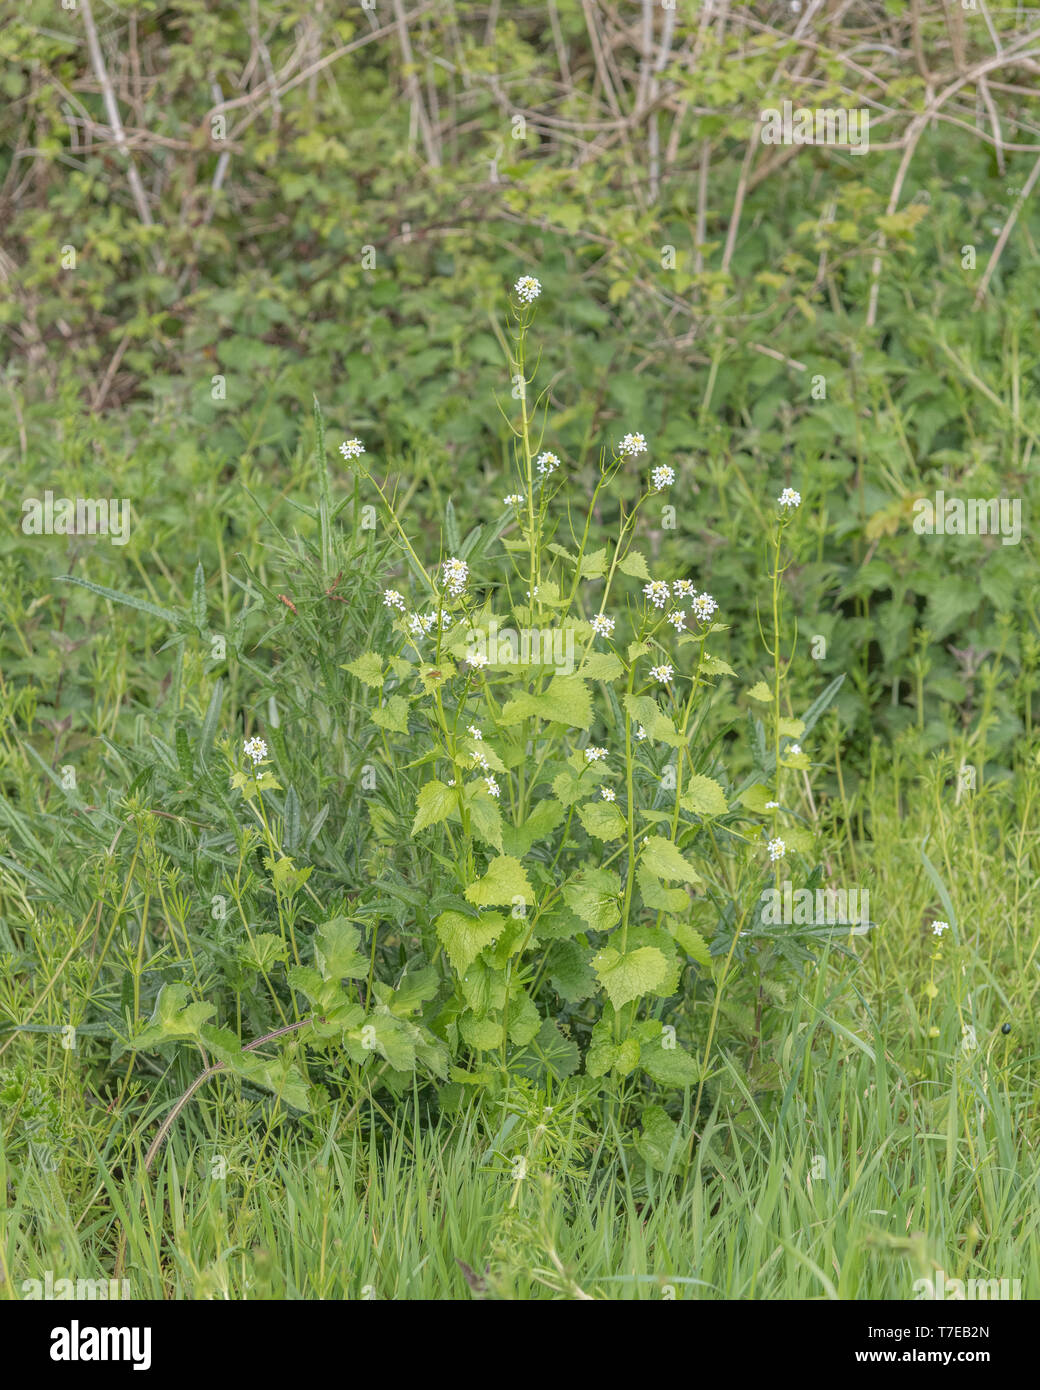 Leaves / foliage and flowers of Hedge Garlic / Jack-by-the-hedge / Alliaria petiolata. Foraging and dining on the wild concept as leaves are edible. Stock Photo